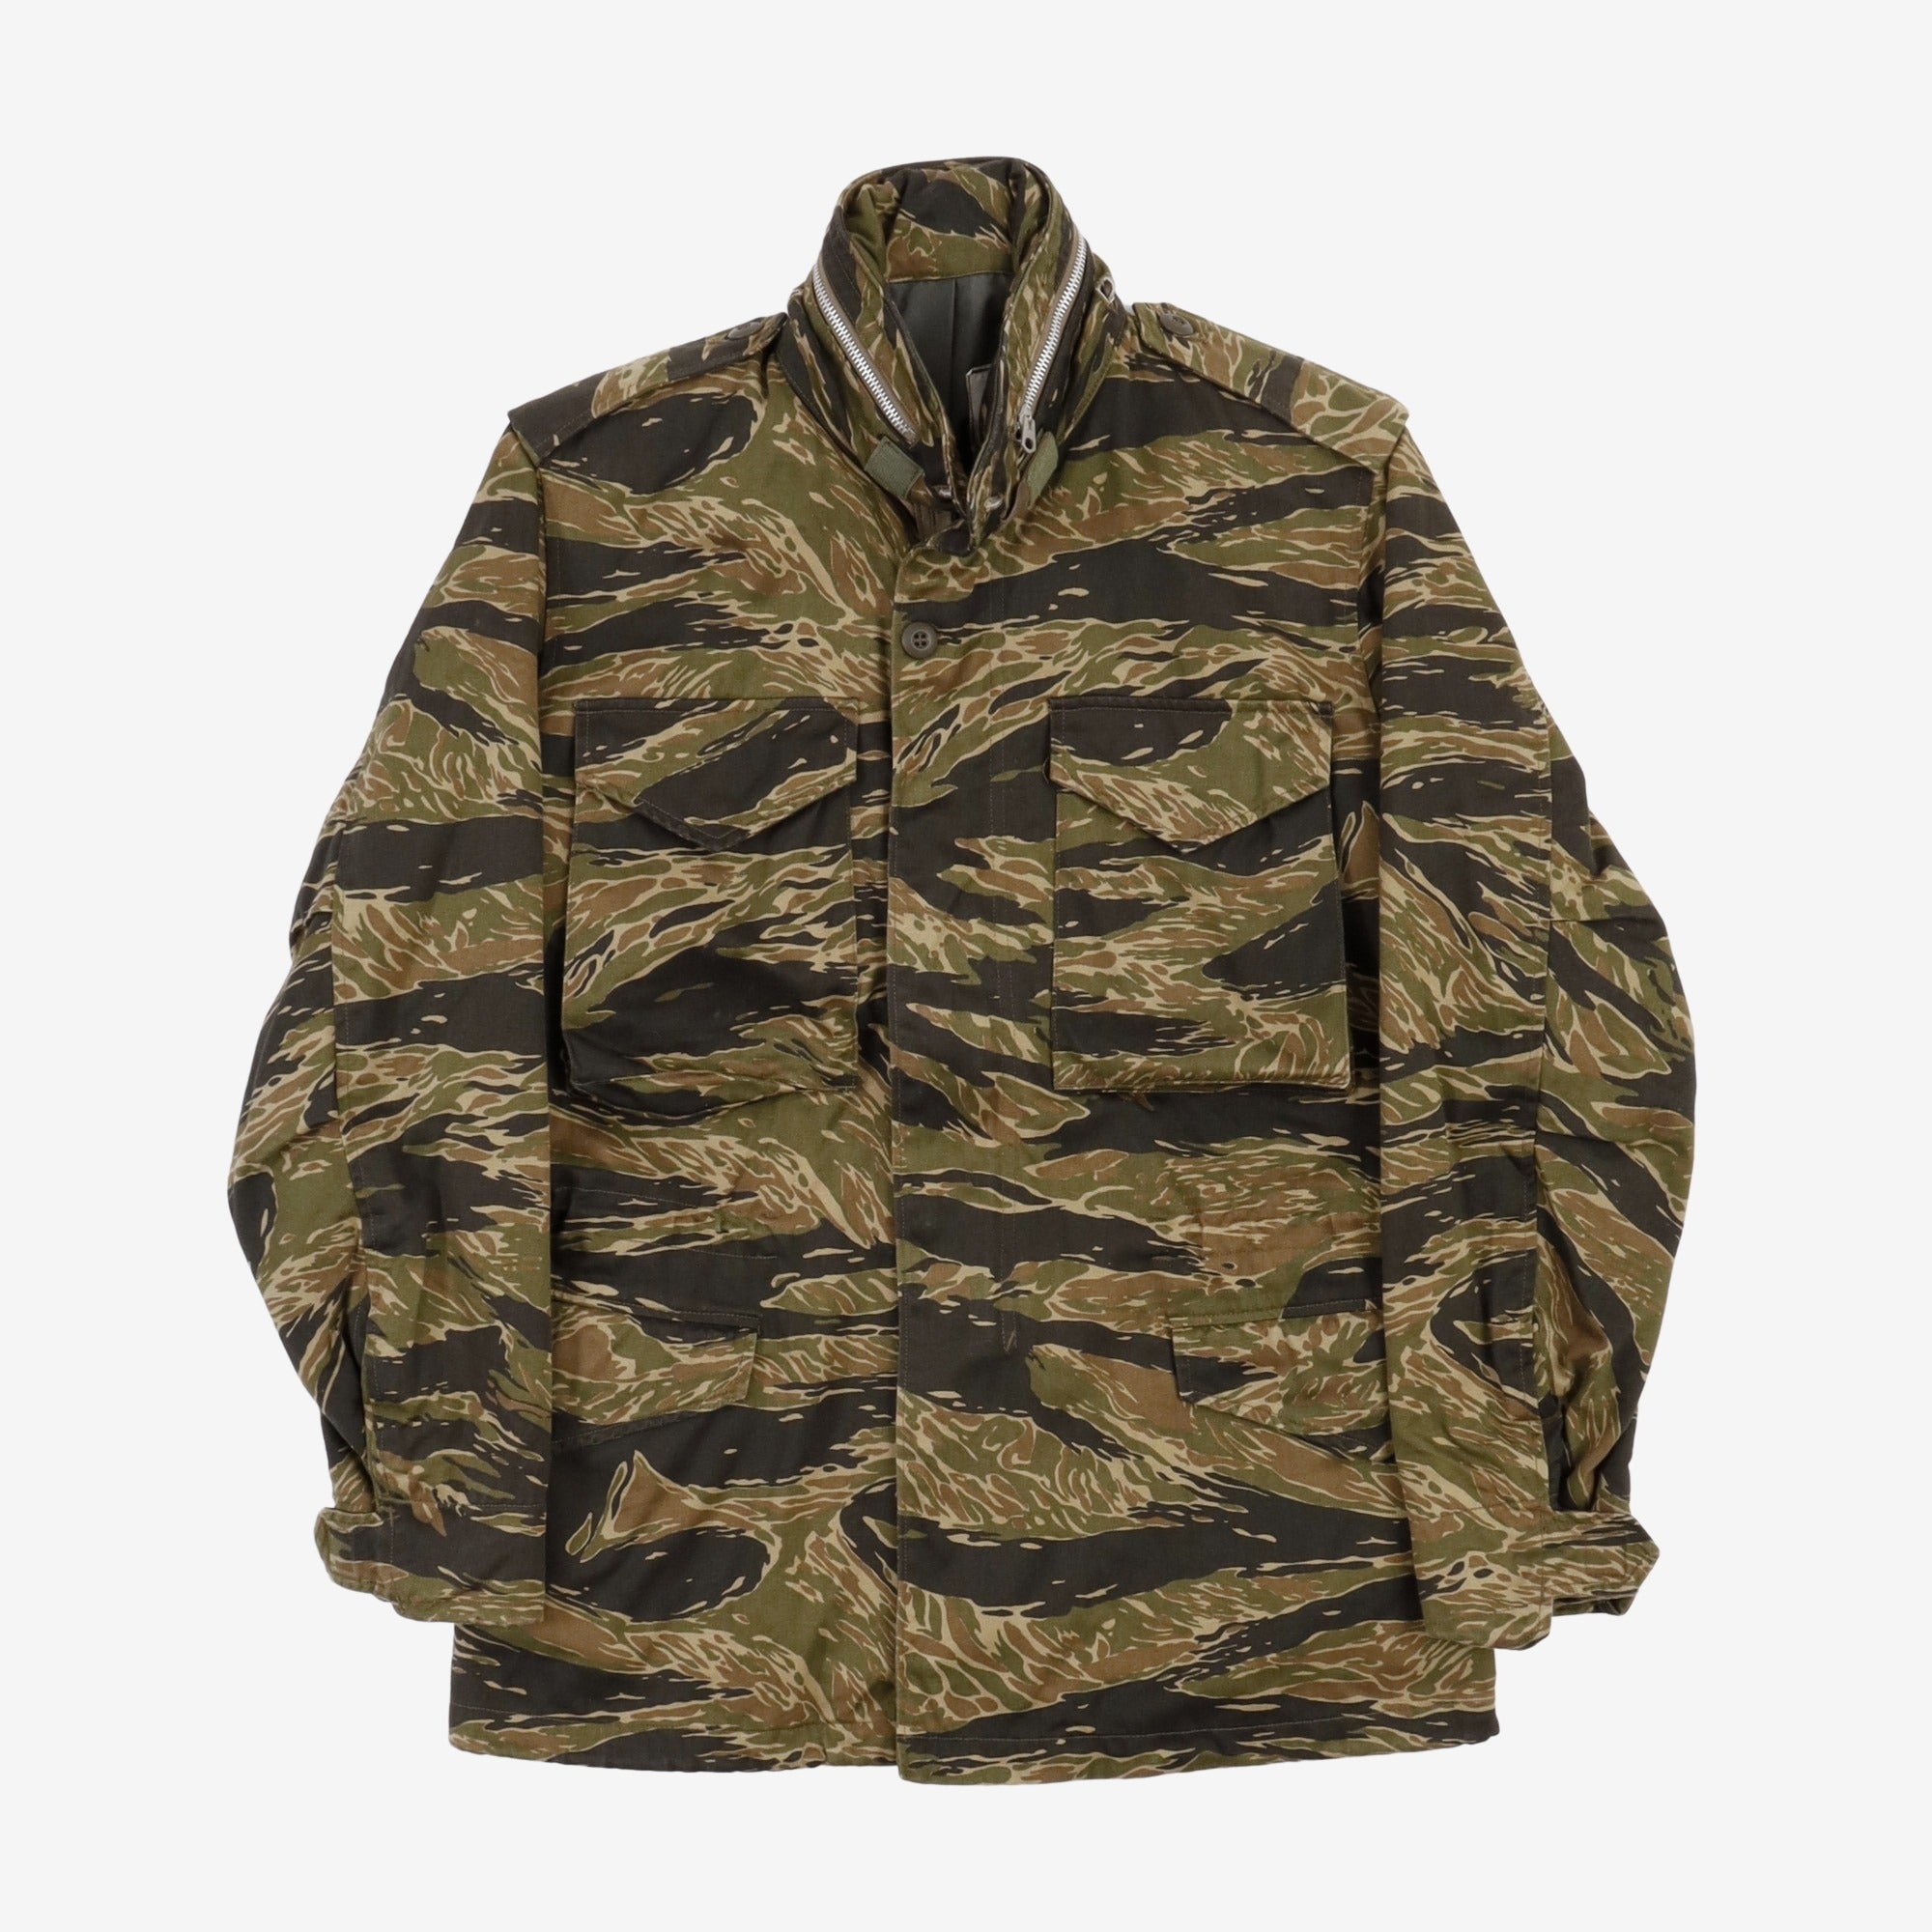 The Real McCoy's M-65 Field Coat / Tiger Camouflage – Marrkt